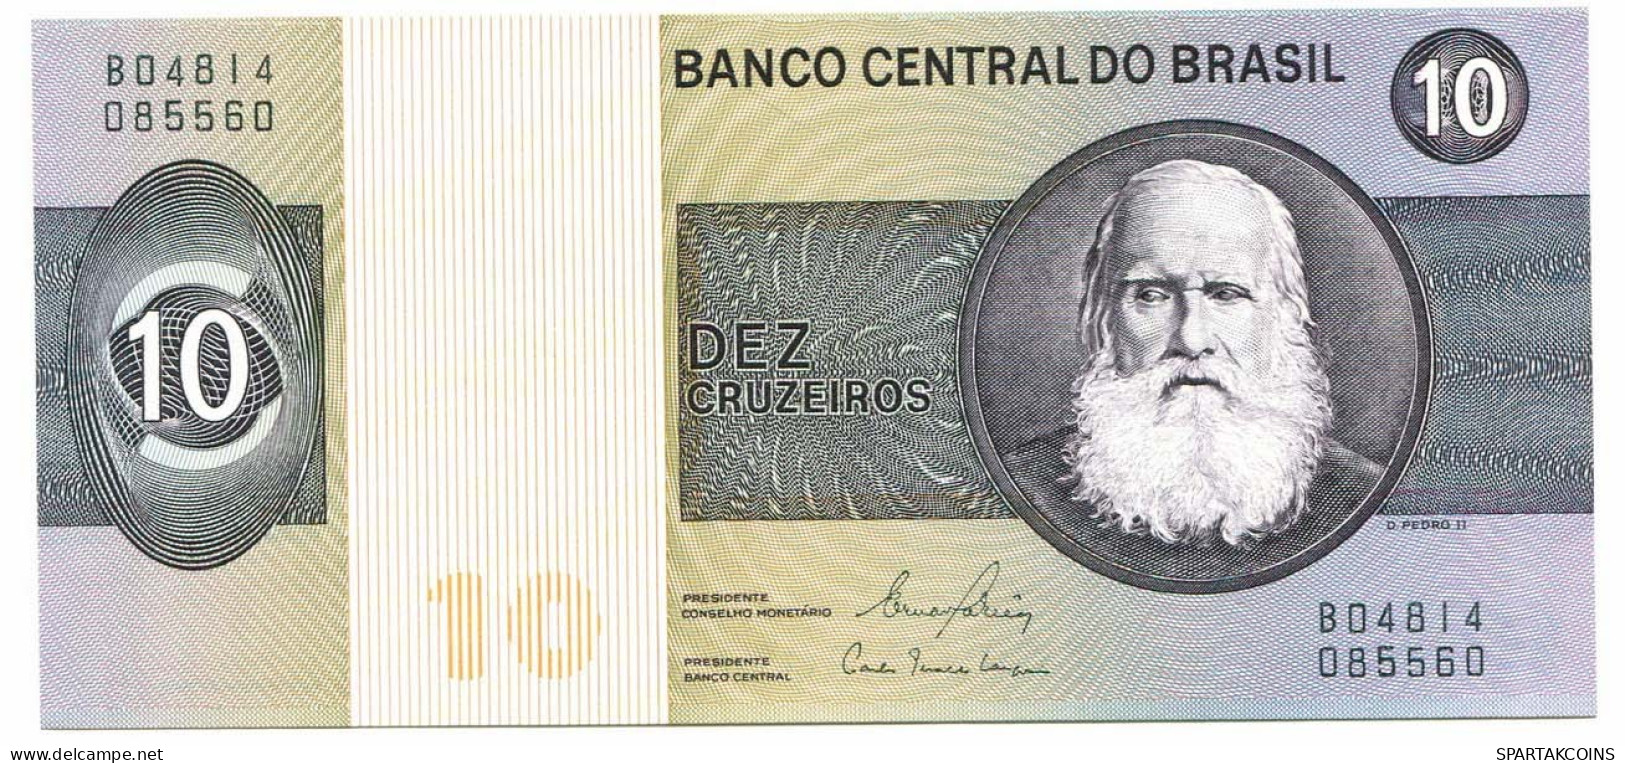 BRASIL 10 CRUZEIROS 1970 UNC Paper Money Banknote #P10836.4 - [11] Local Banknote Issues